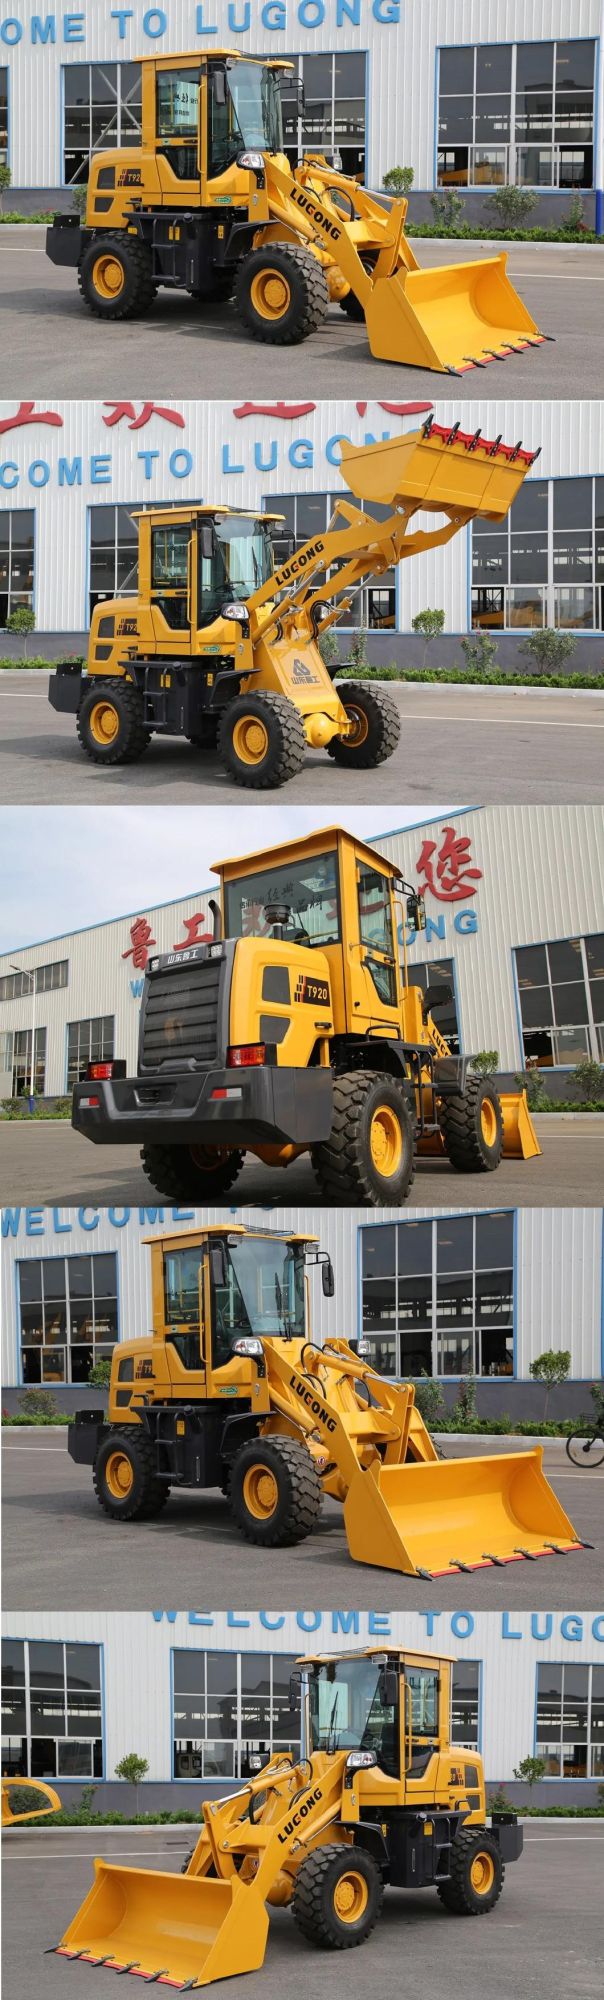 China Famous Brand Lugong Compact Factory Price Front End Loader